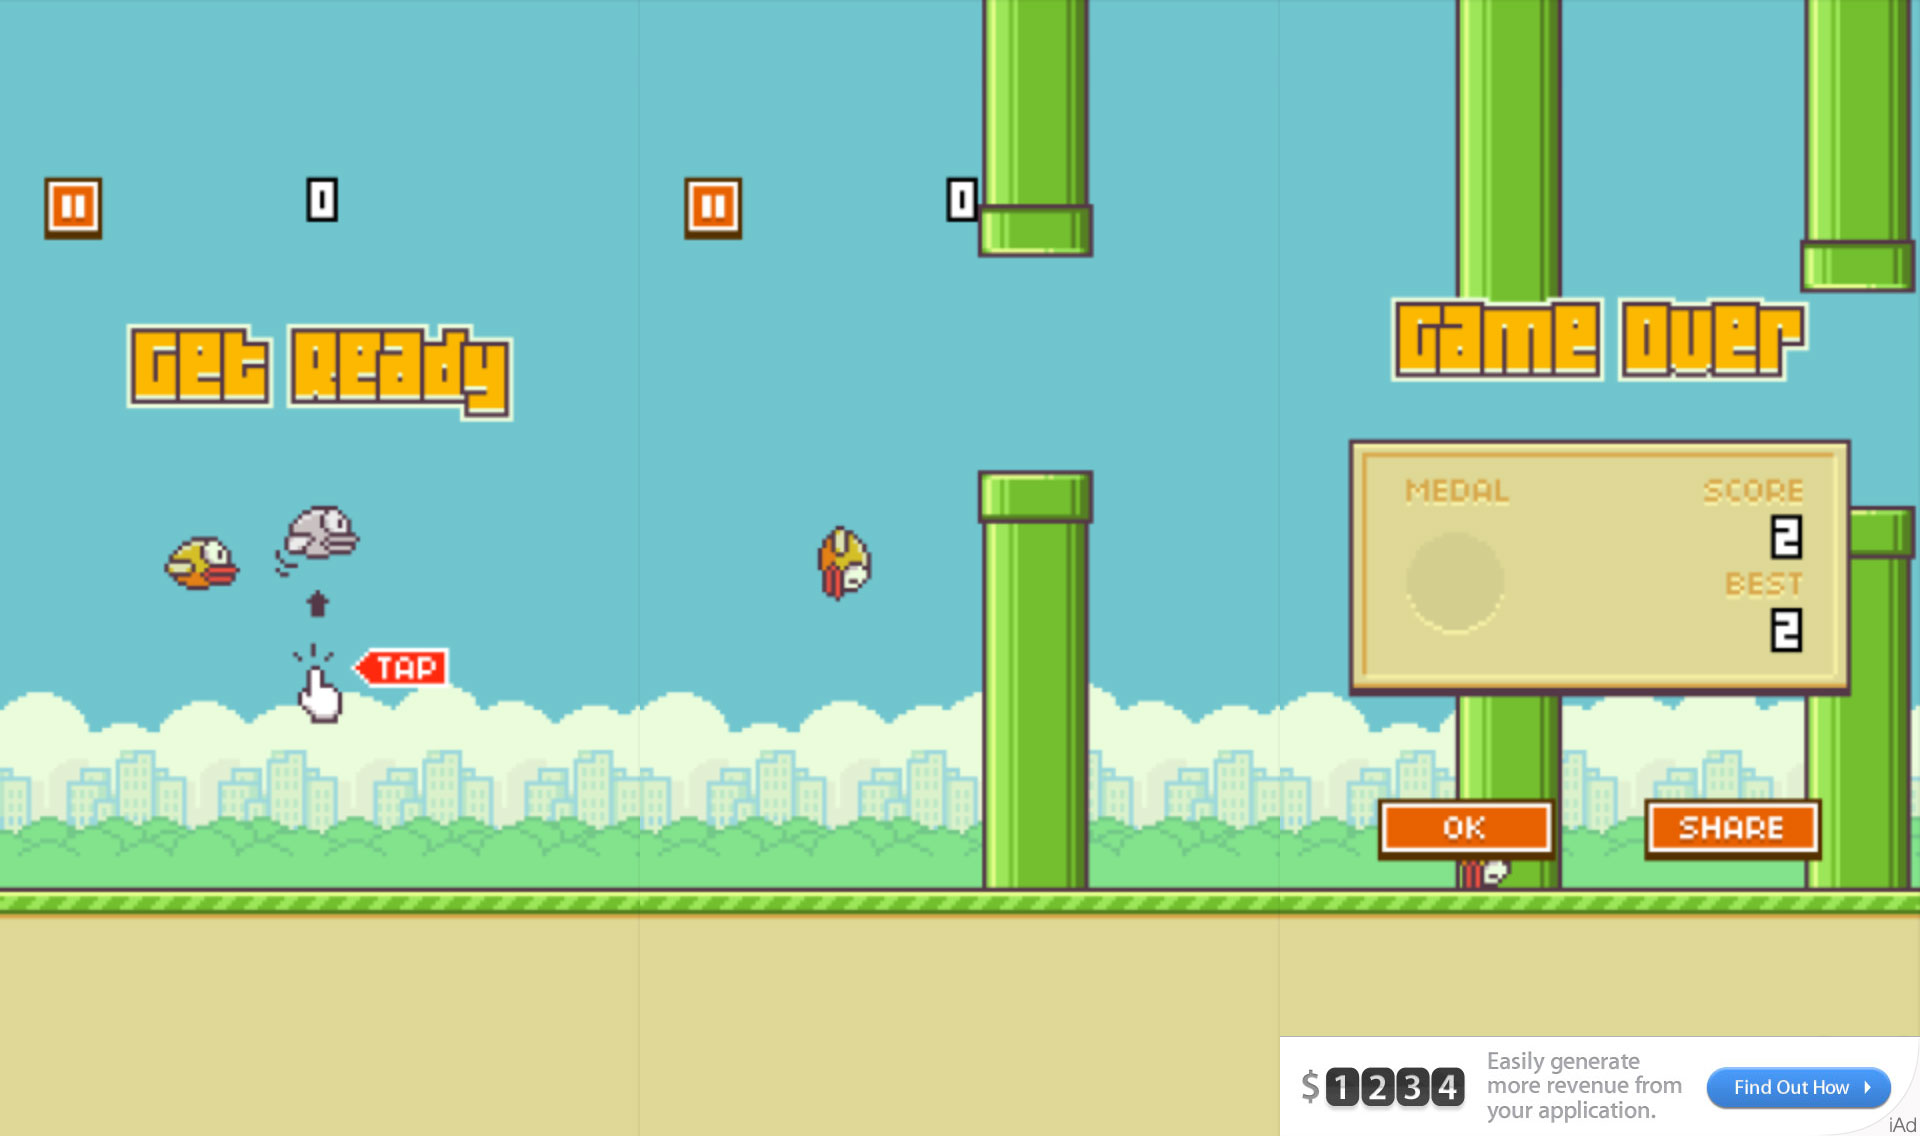 We look at why Flappy Bird is so addictive that gamers are hacking it for higher scores.